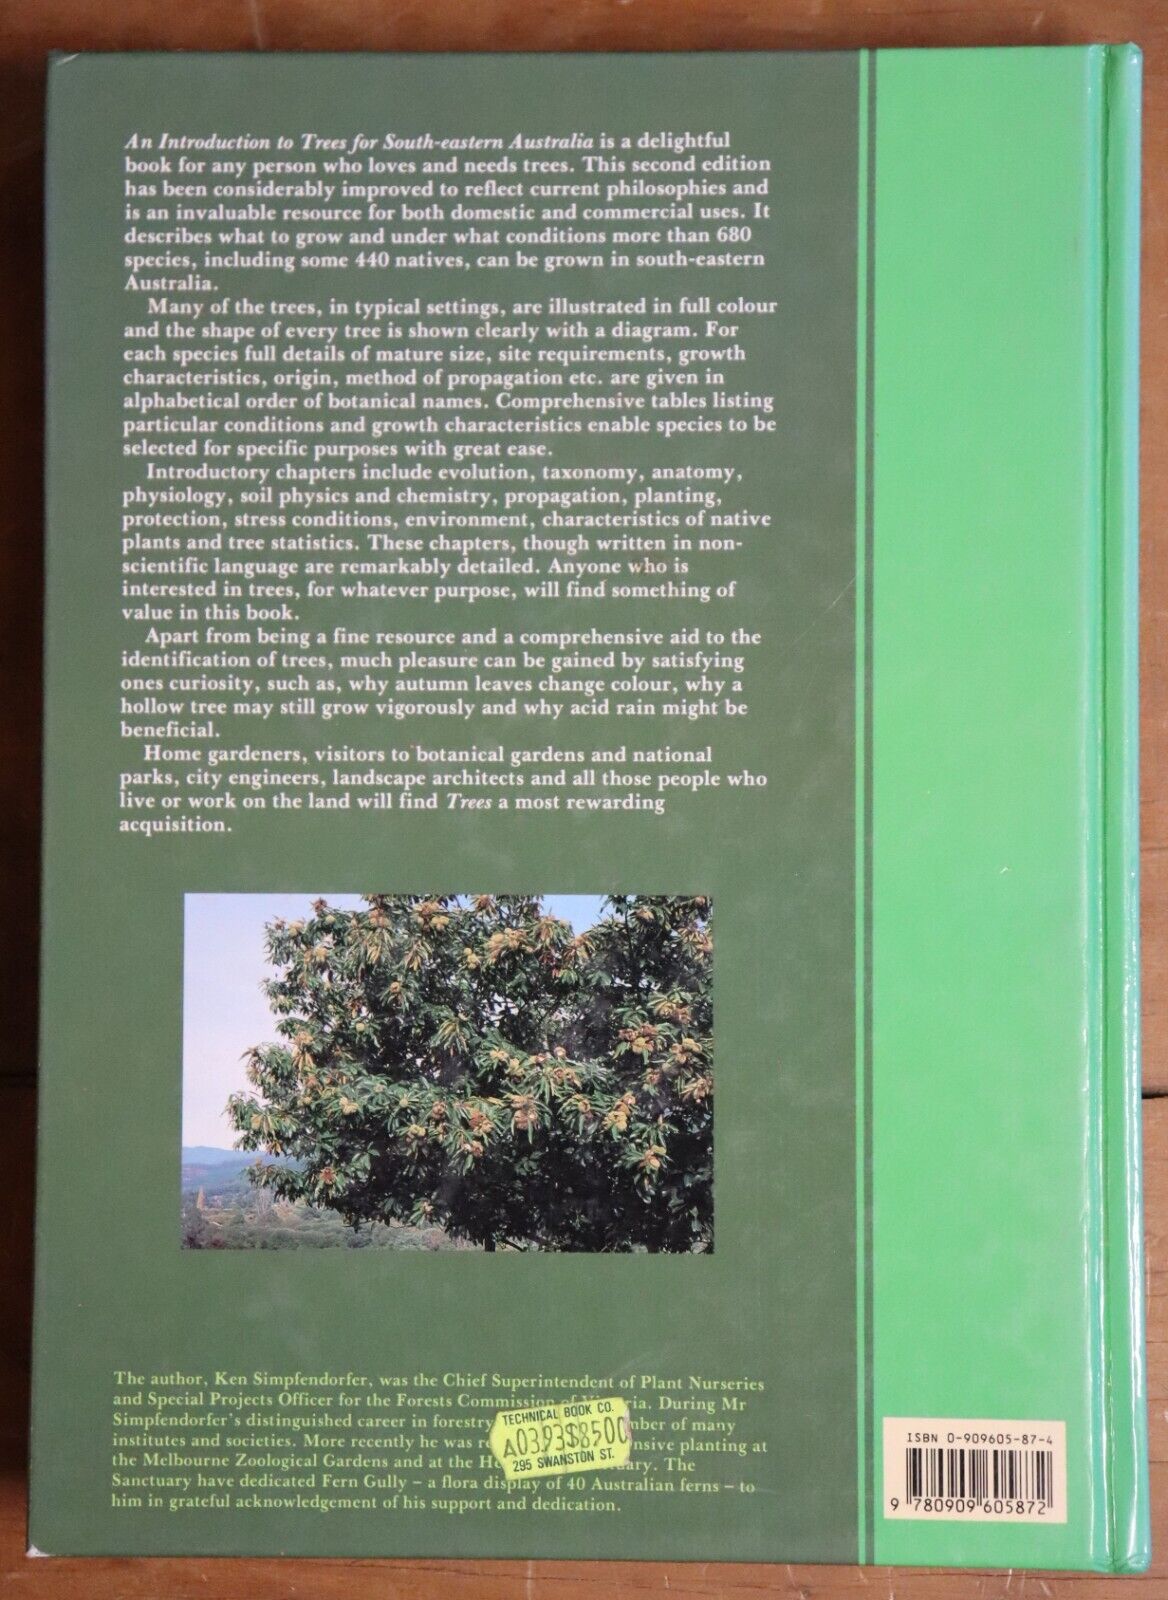 An Introduction to Trees for South-Eastern Australia - 1992 - Gardening Book